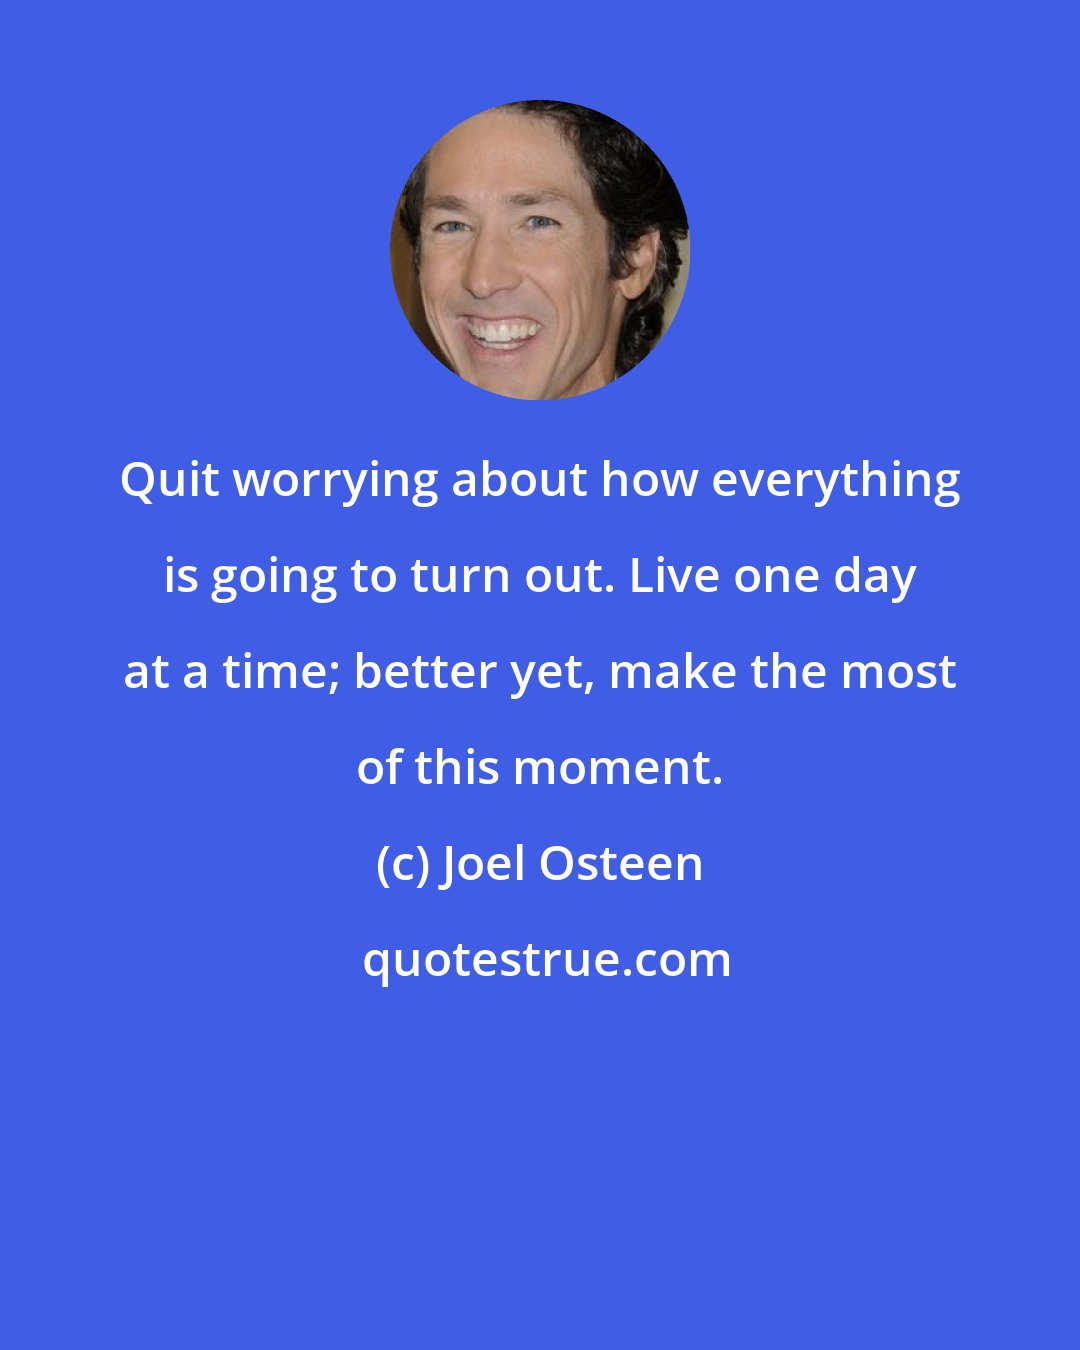 Joel Osteen: Quit worrying about how everything is going to turn out. Live one day at a time; better yet, make the most of this moment.